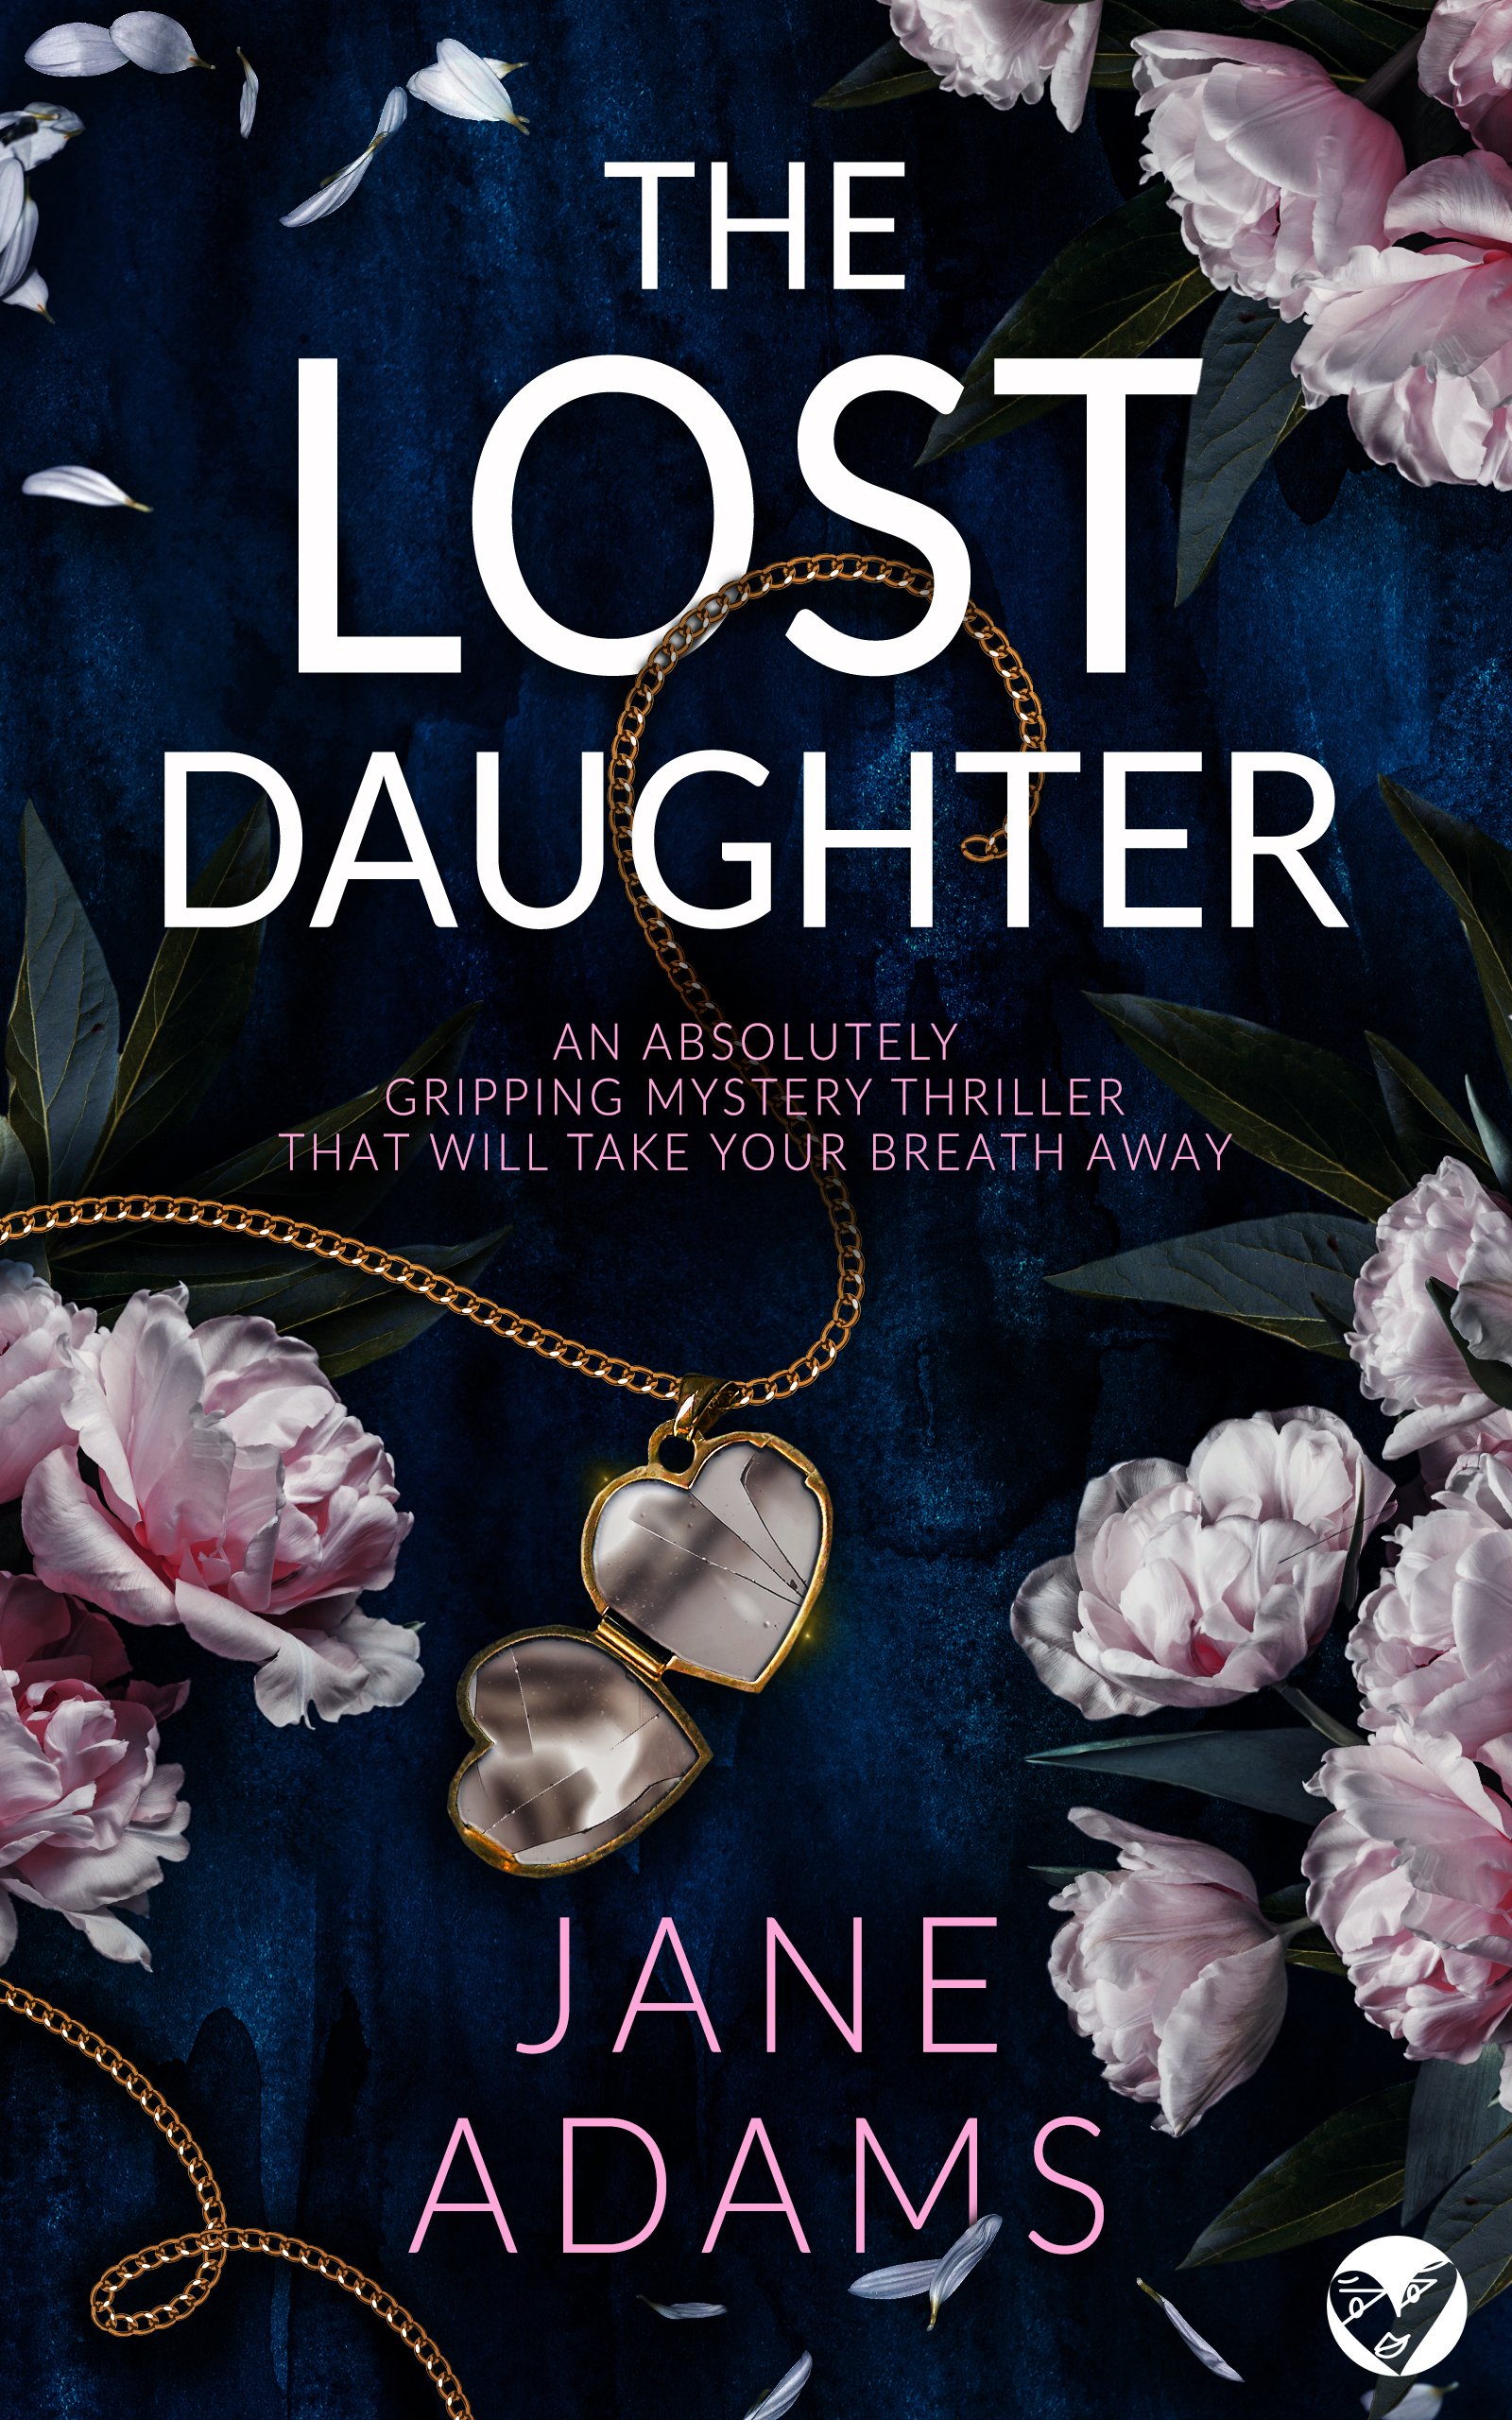 THE LOST DAUGHTER cover publish.jpg